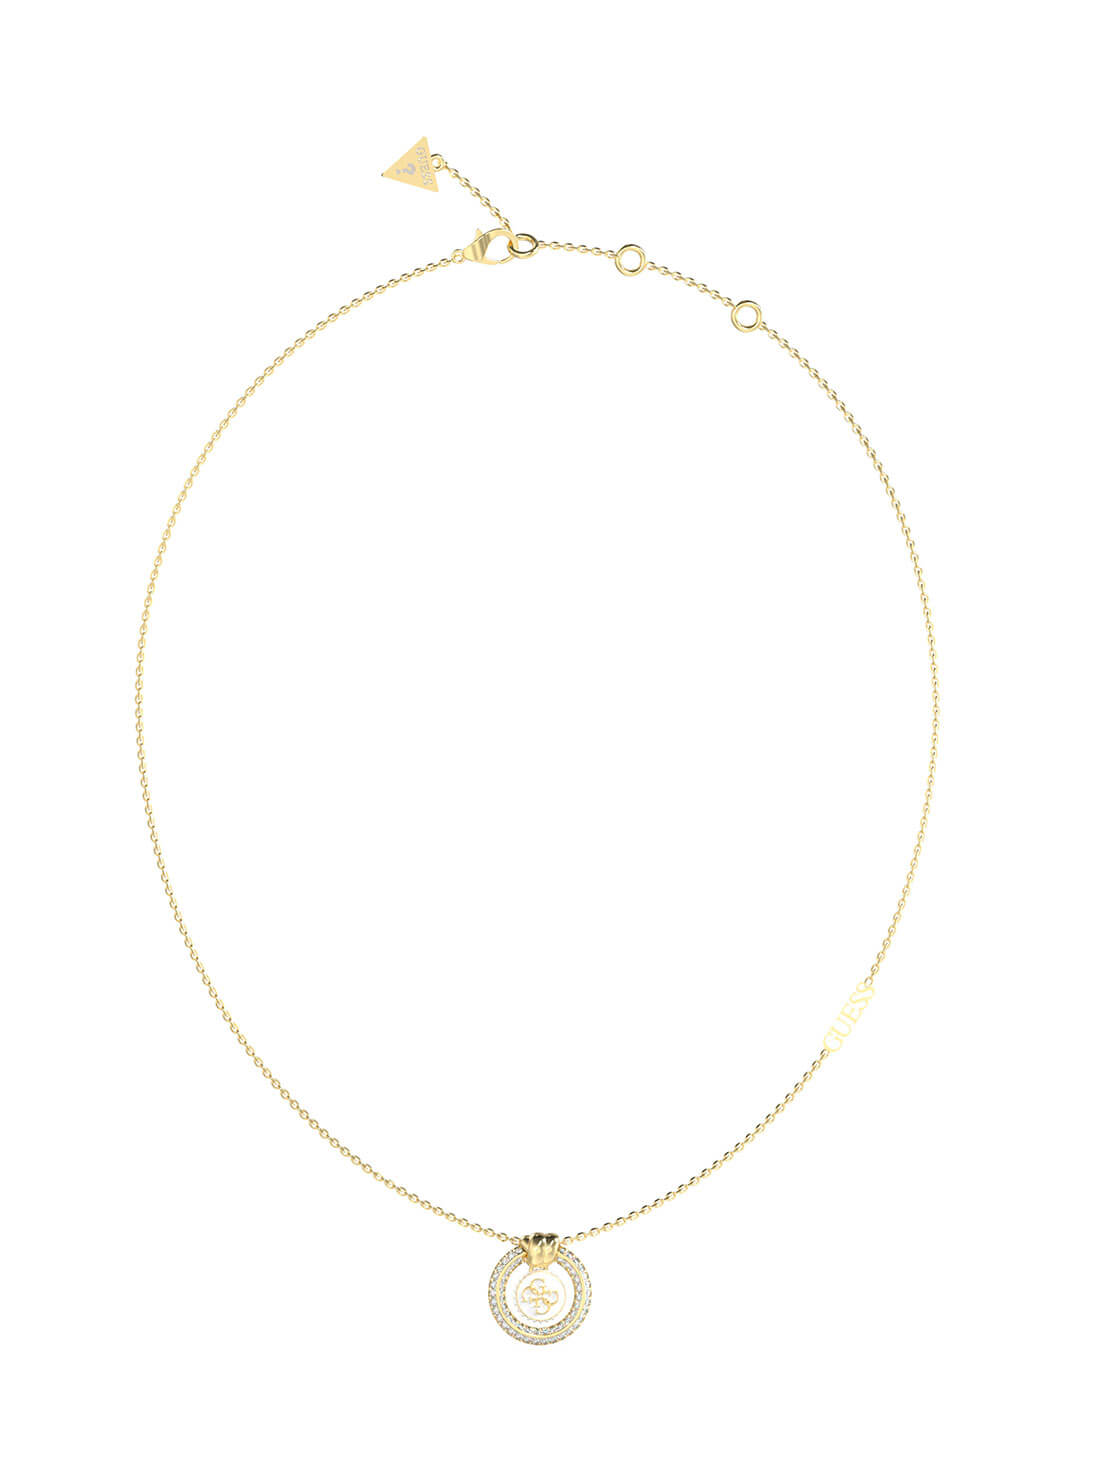 Gold Knot You White Crystal Necklace | GUESS Women's Jewellery | front view